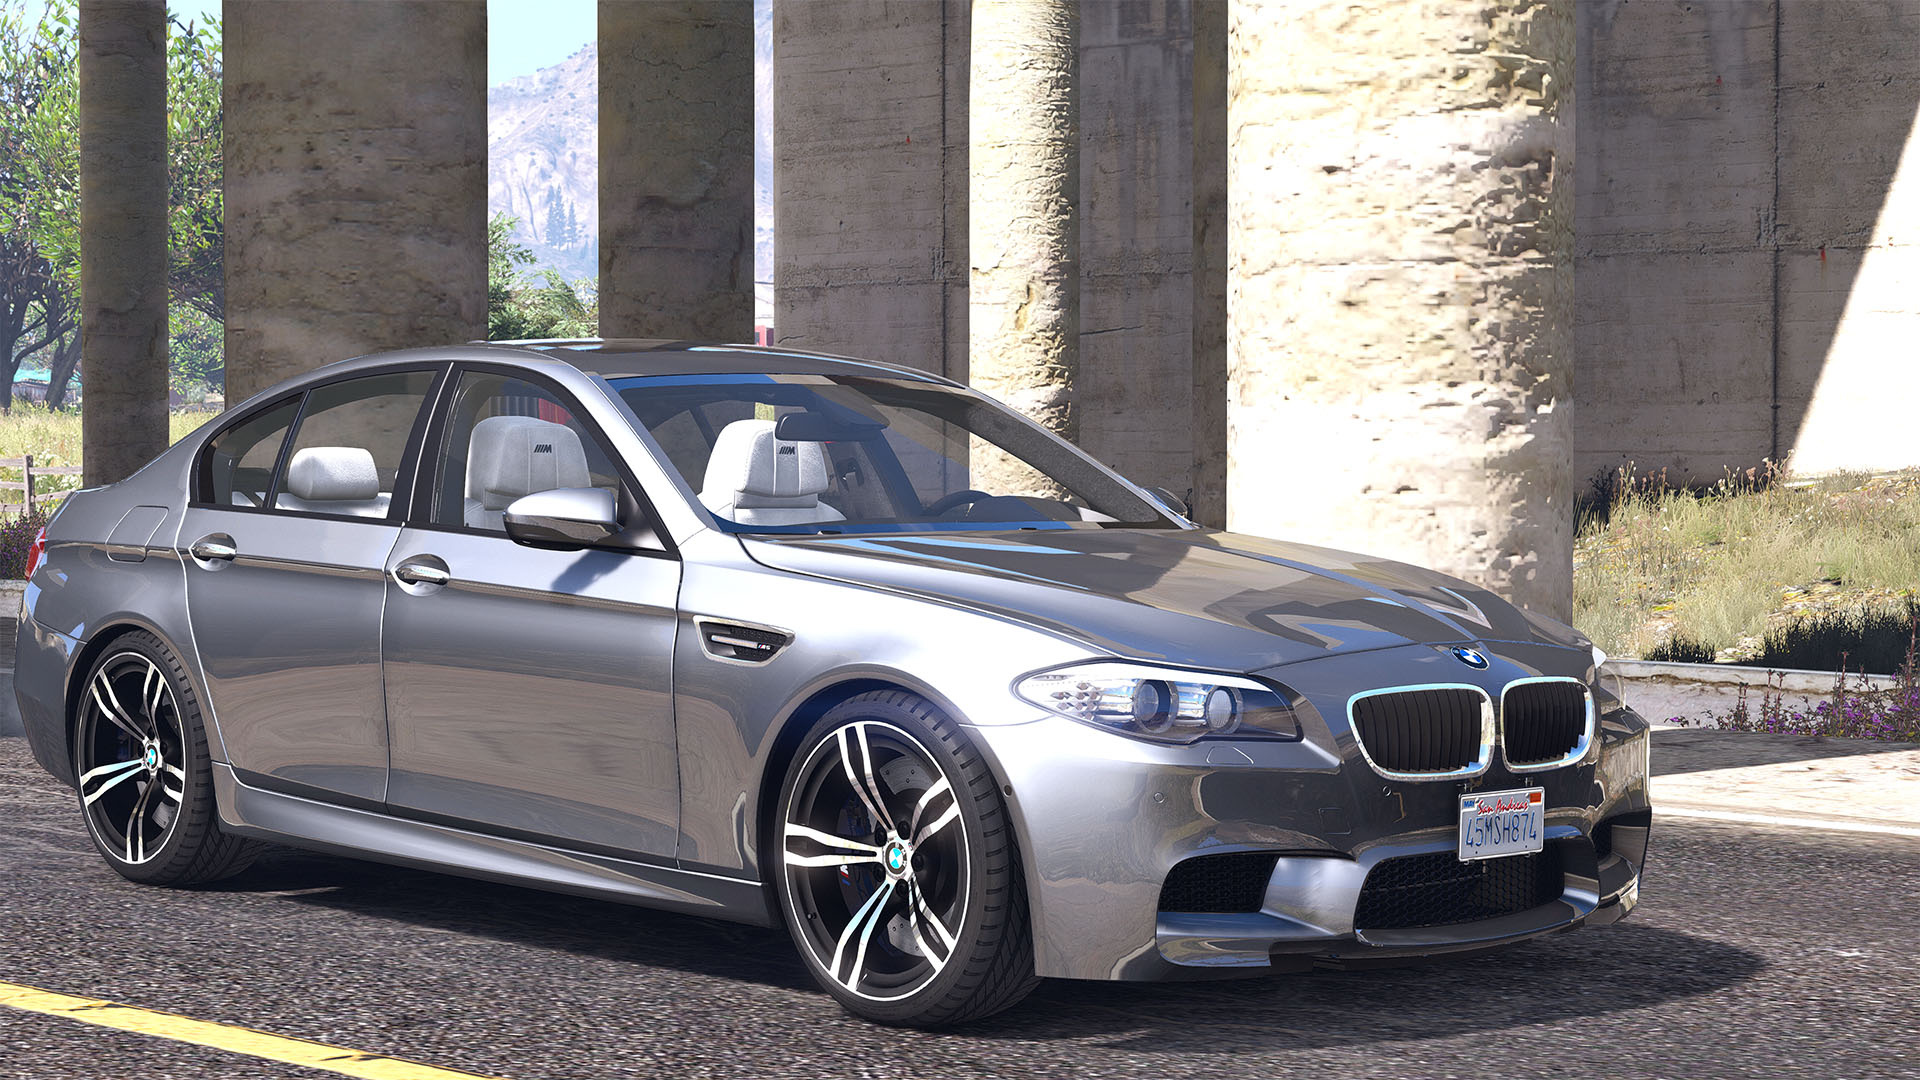 https://img.gta5-mods.com/q95/images/2012-bmw-m5-f10-add-on-replace-animated/952604-1.jpg